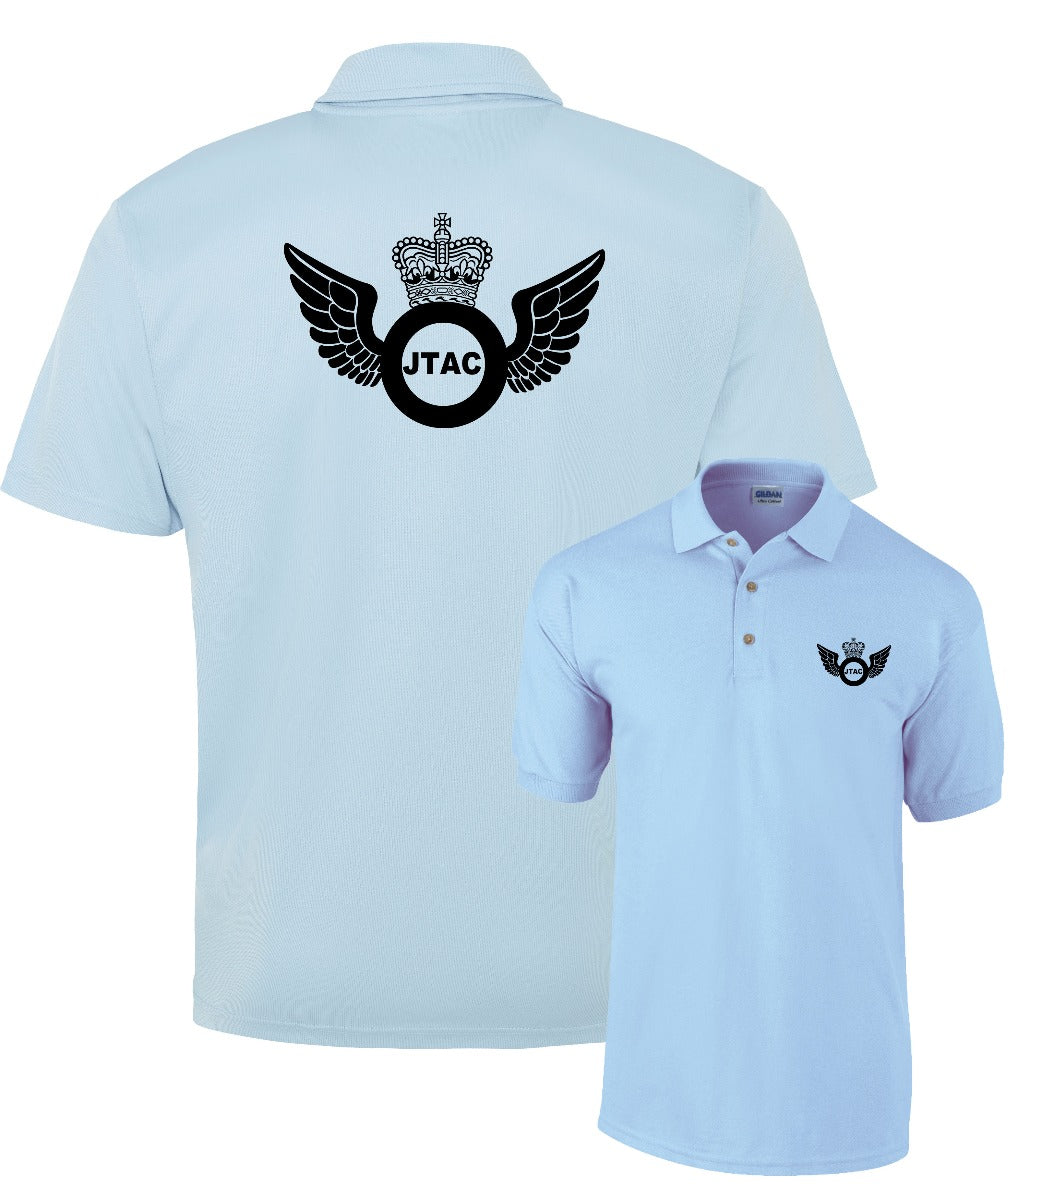 Double Printed JTAC Wicking Polo Shirt